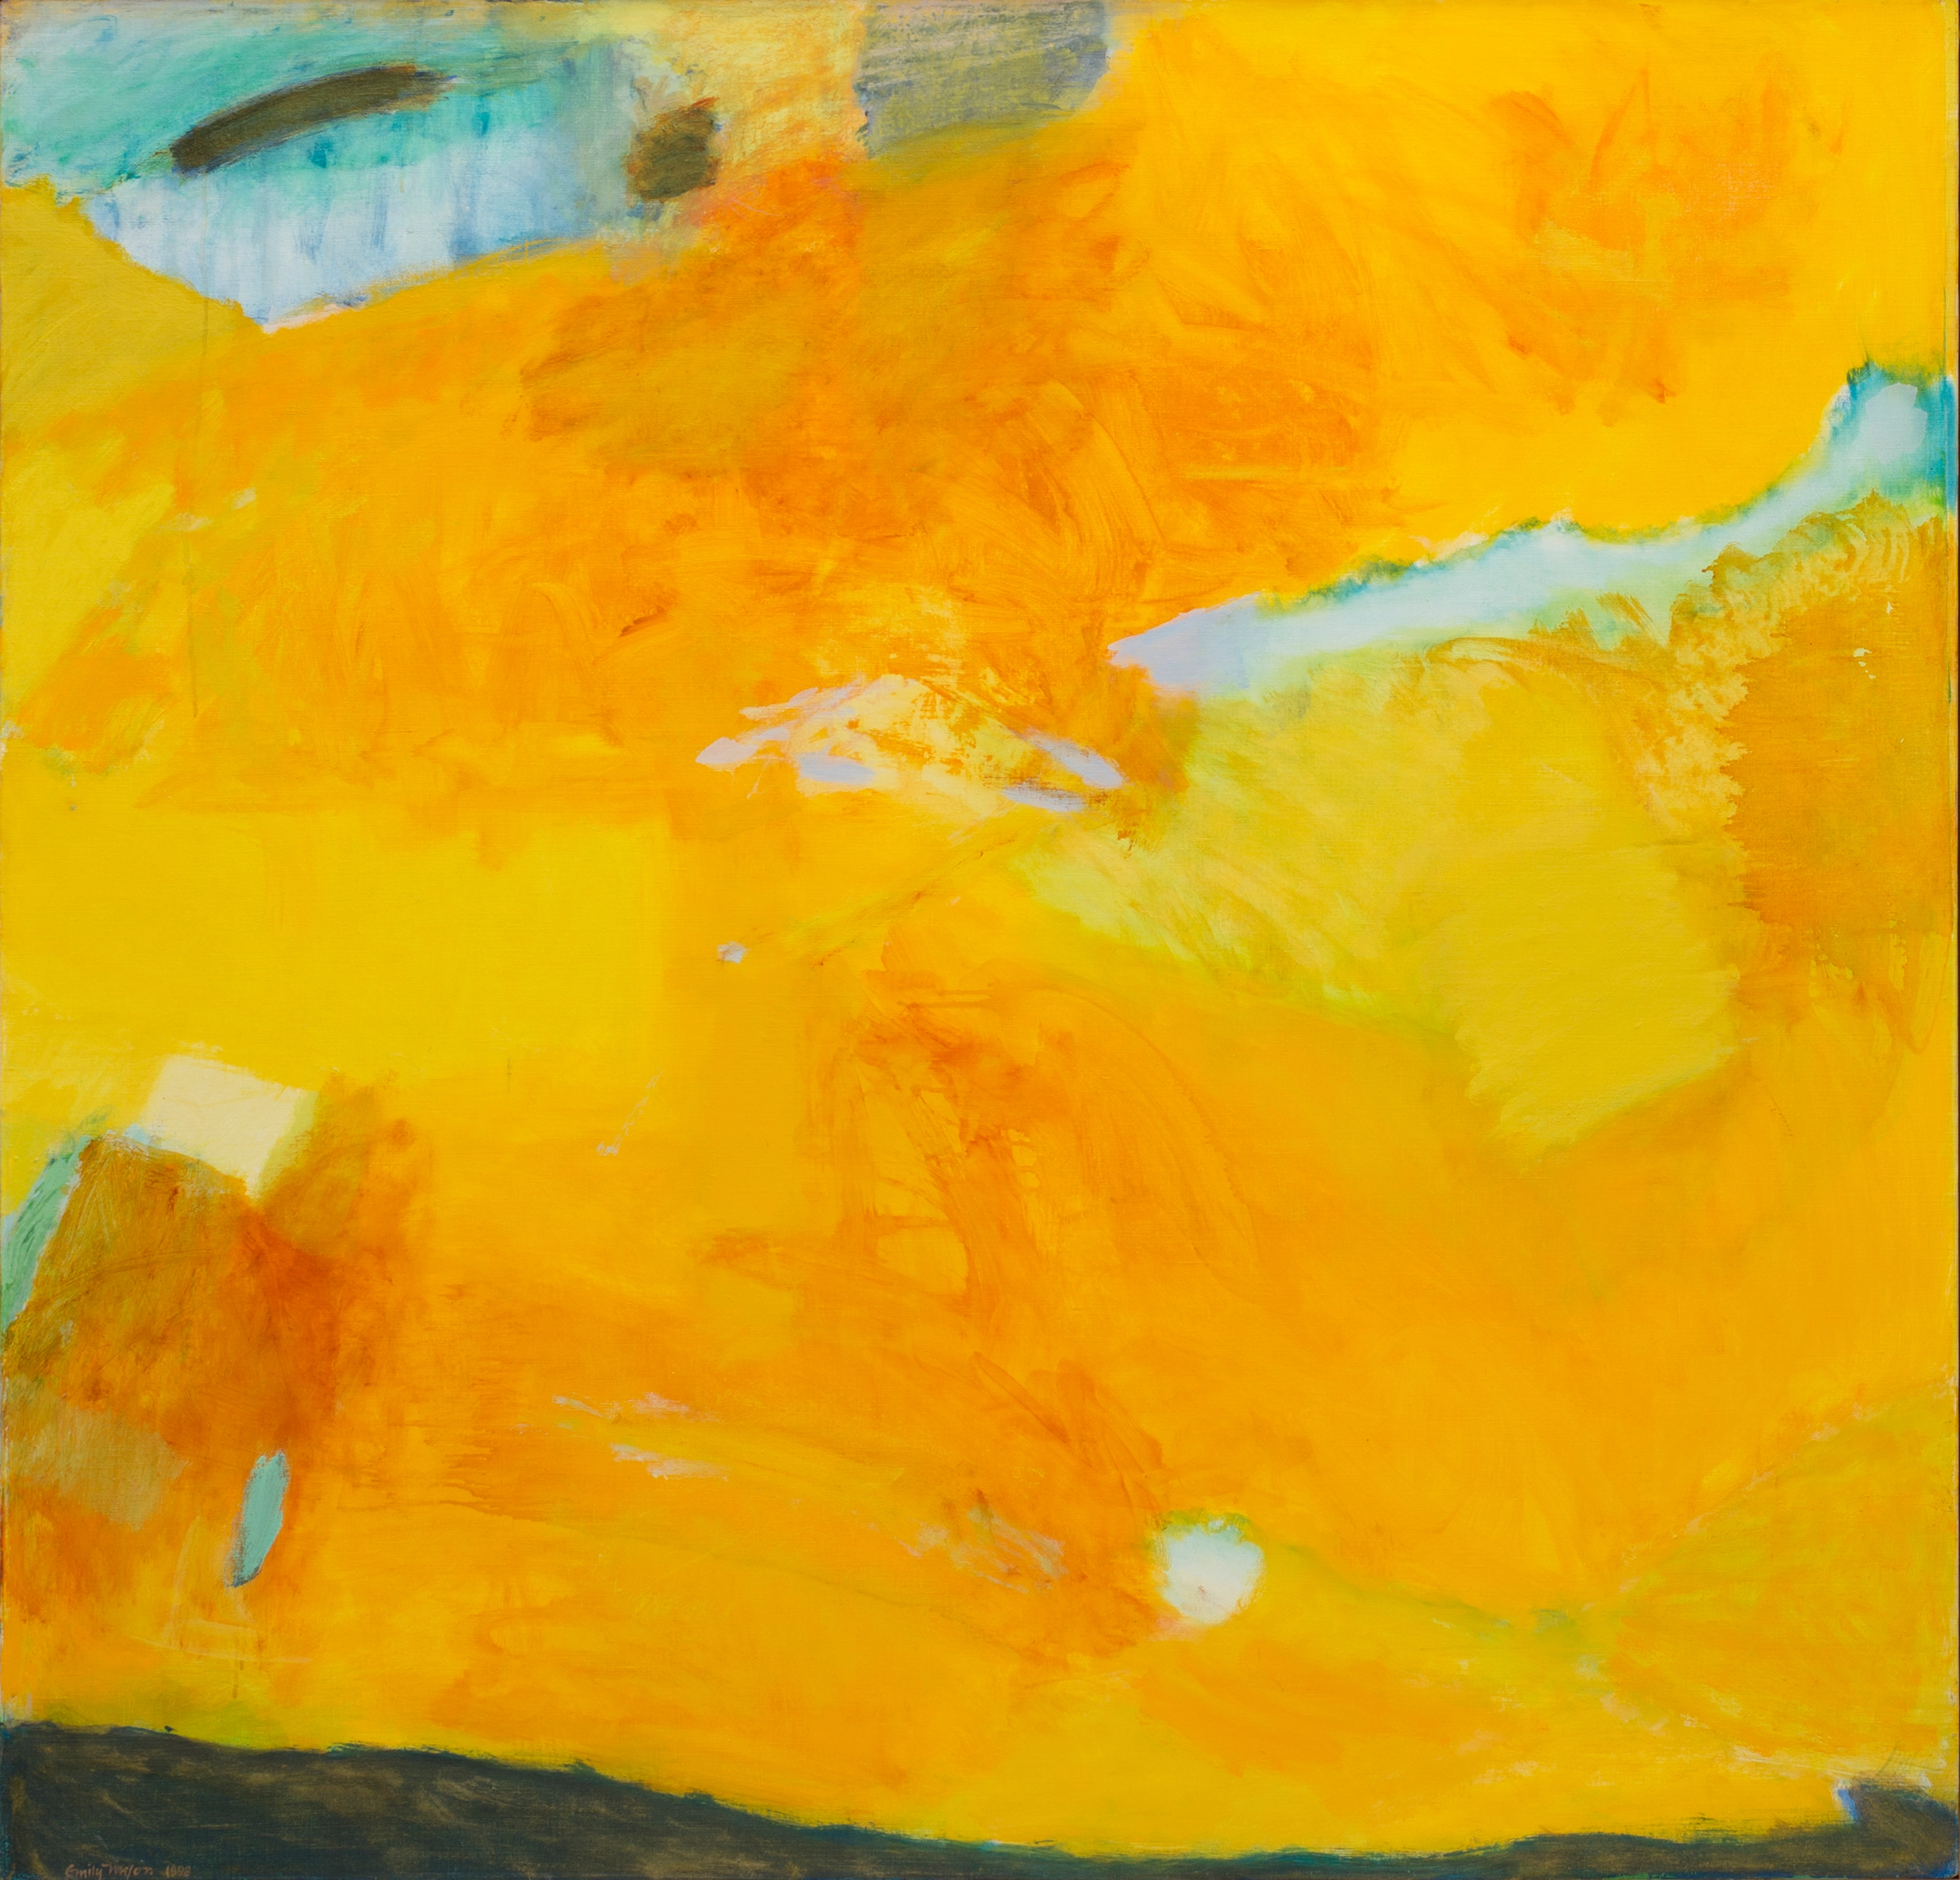 Abstract oil painting with yellow and yellow-orange brushstrokes, punctuated with small areas of turquoise and light-blue thought.